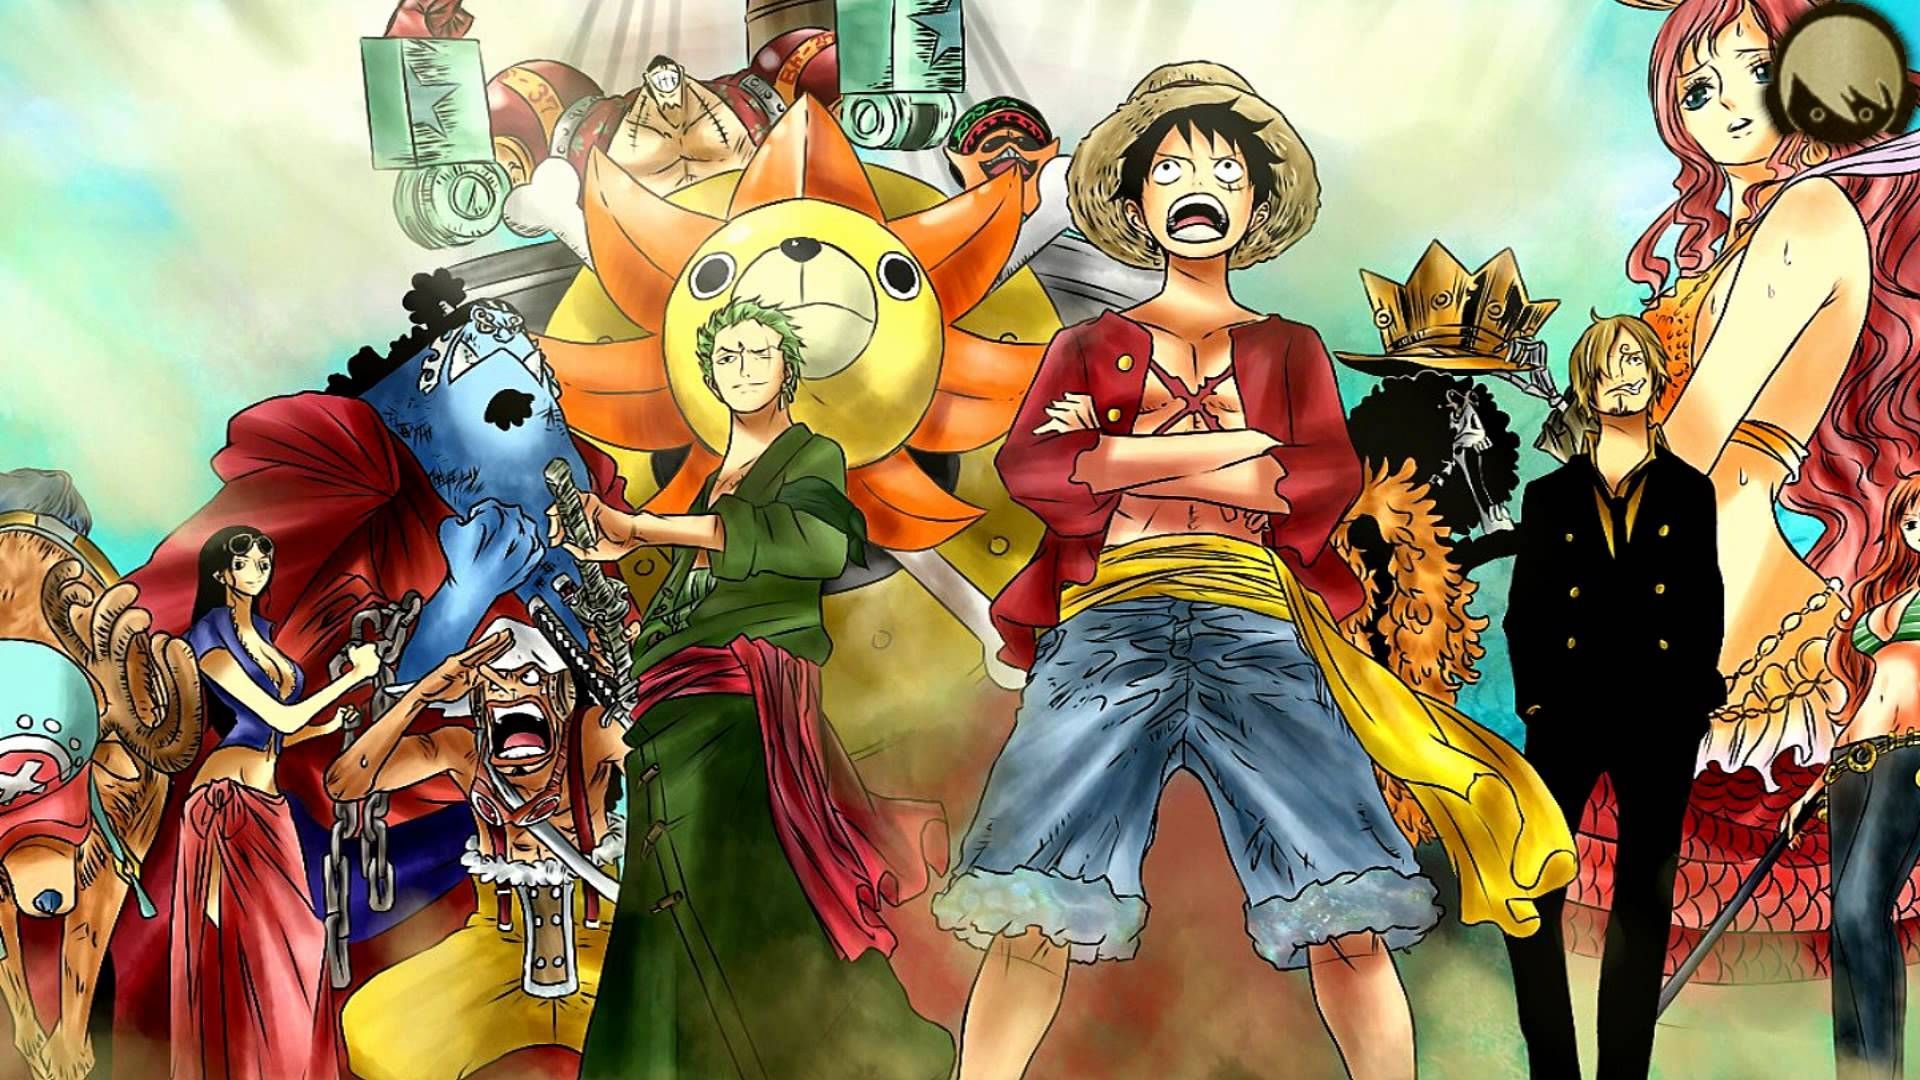 One Piece Ps3 Wallpapers Wallpaper Cave